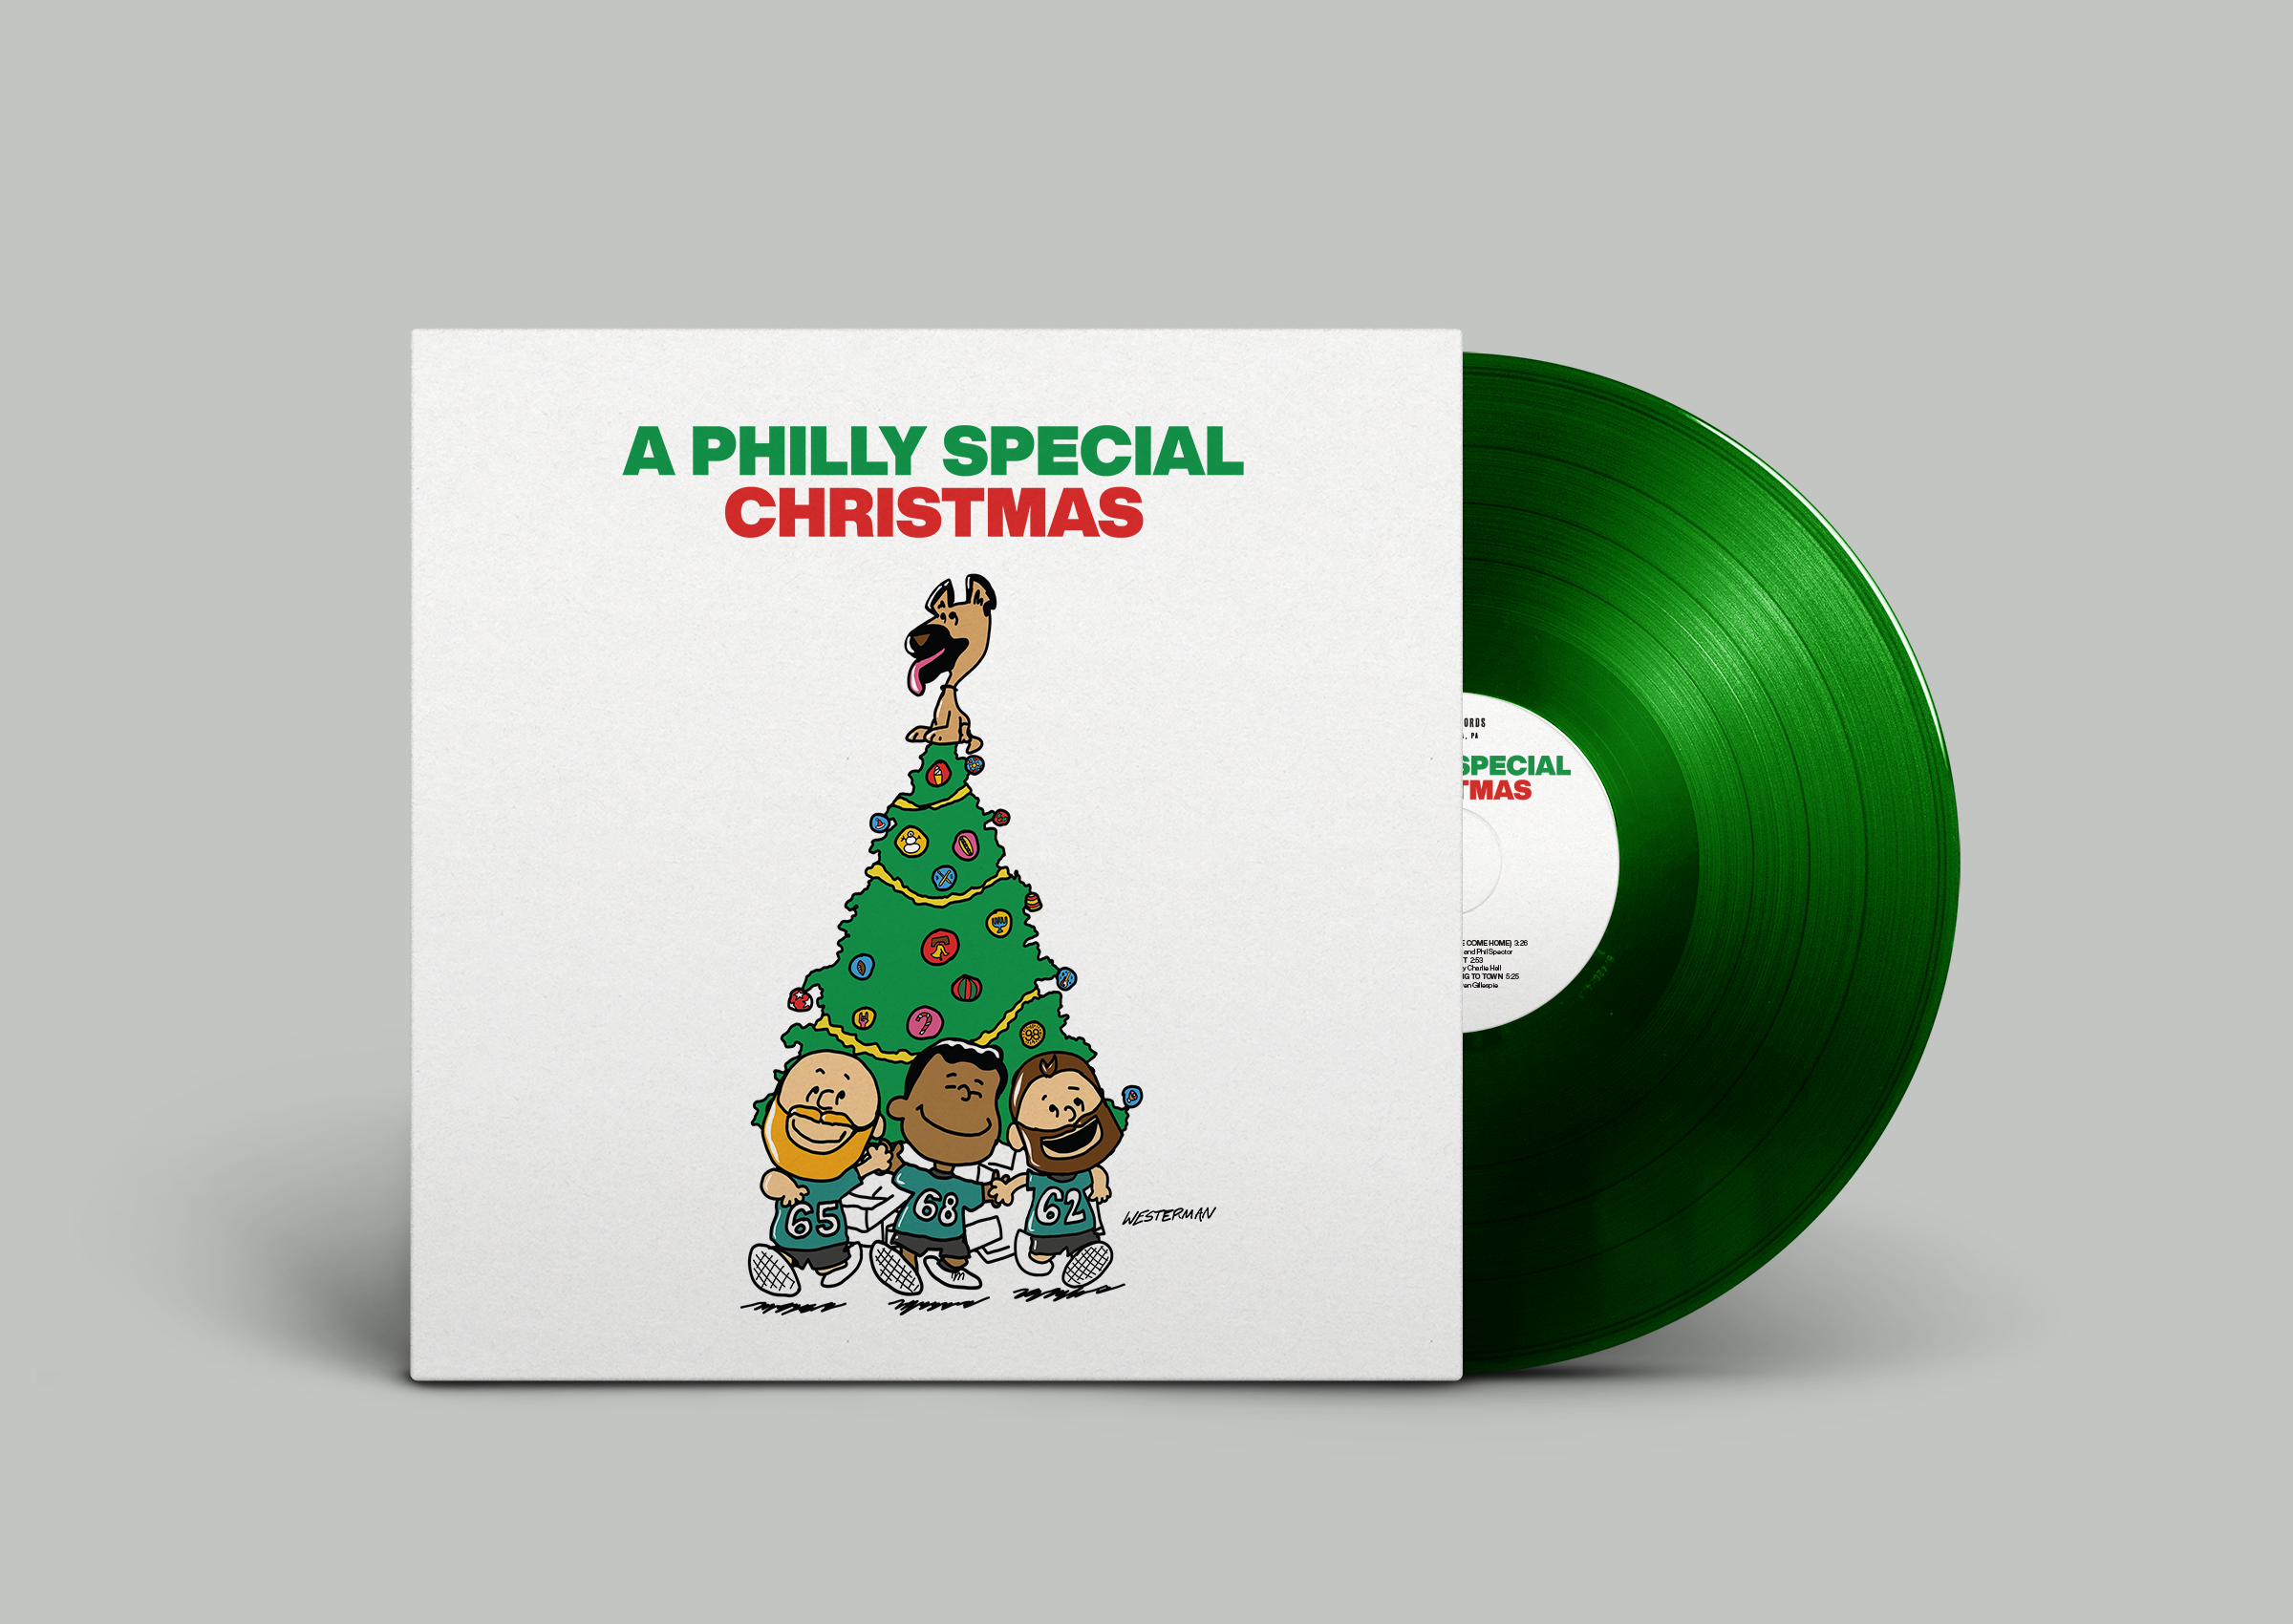 A Philly Special Christmas  "The Record" Vinyl